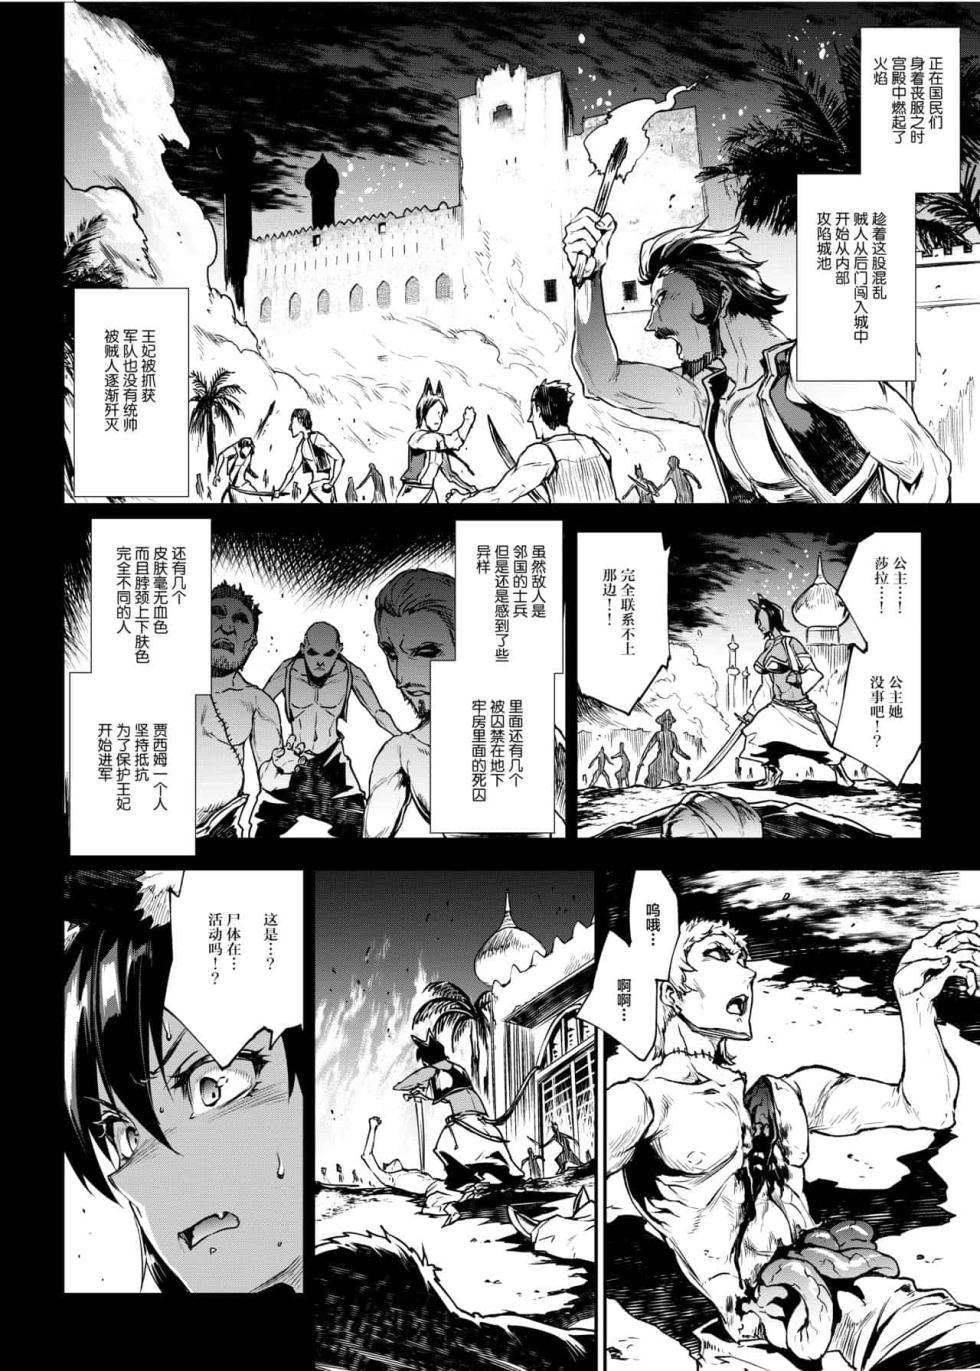 [ERECT TOUCH (エレクトさわる)] ふたなり剣舞士ジャシム 1-3 [中国翻訳] - Page 6